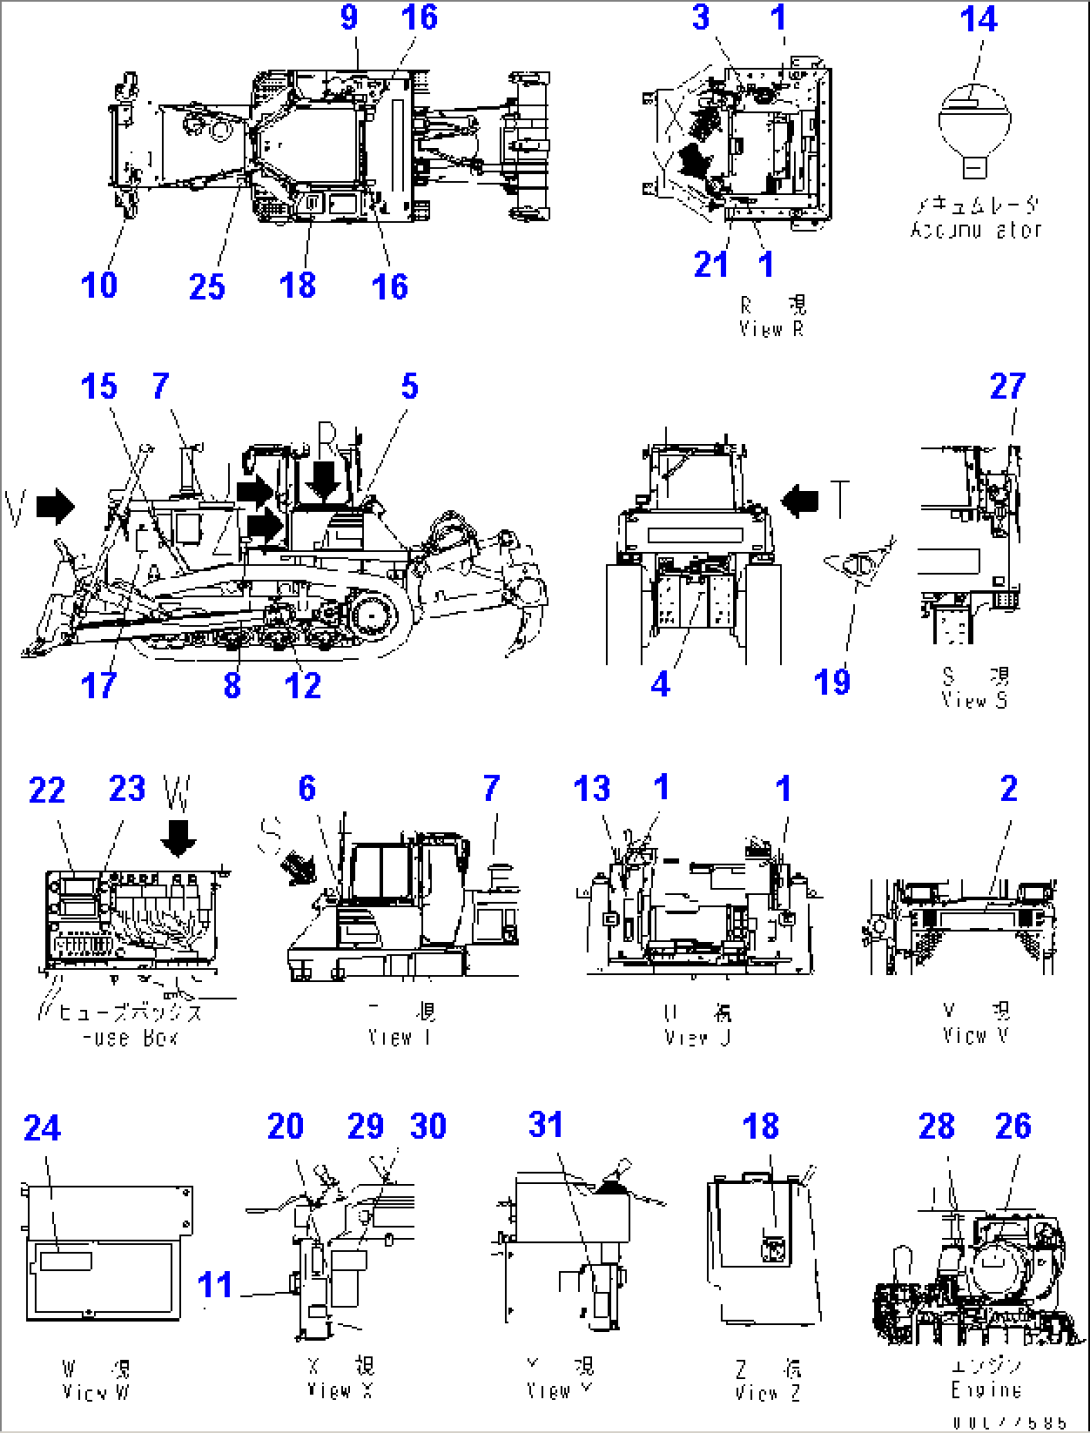 MARKS AND PLATES (ENGLISH)(#80001-80806)